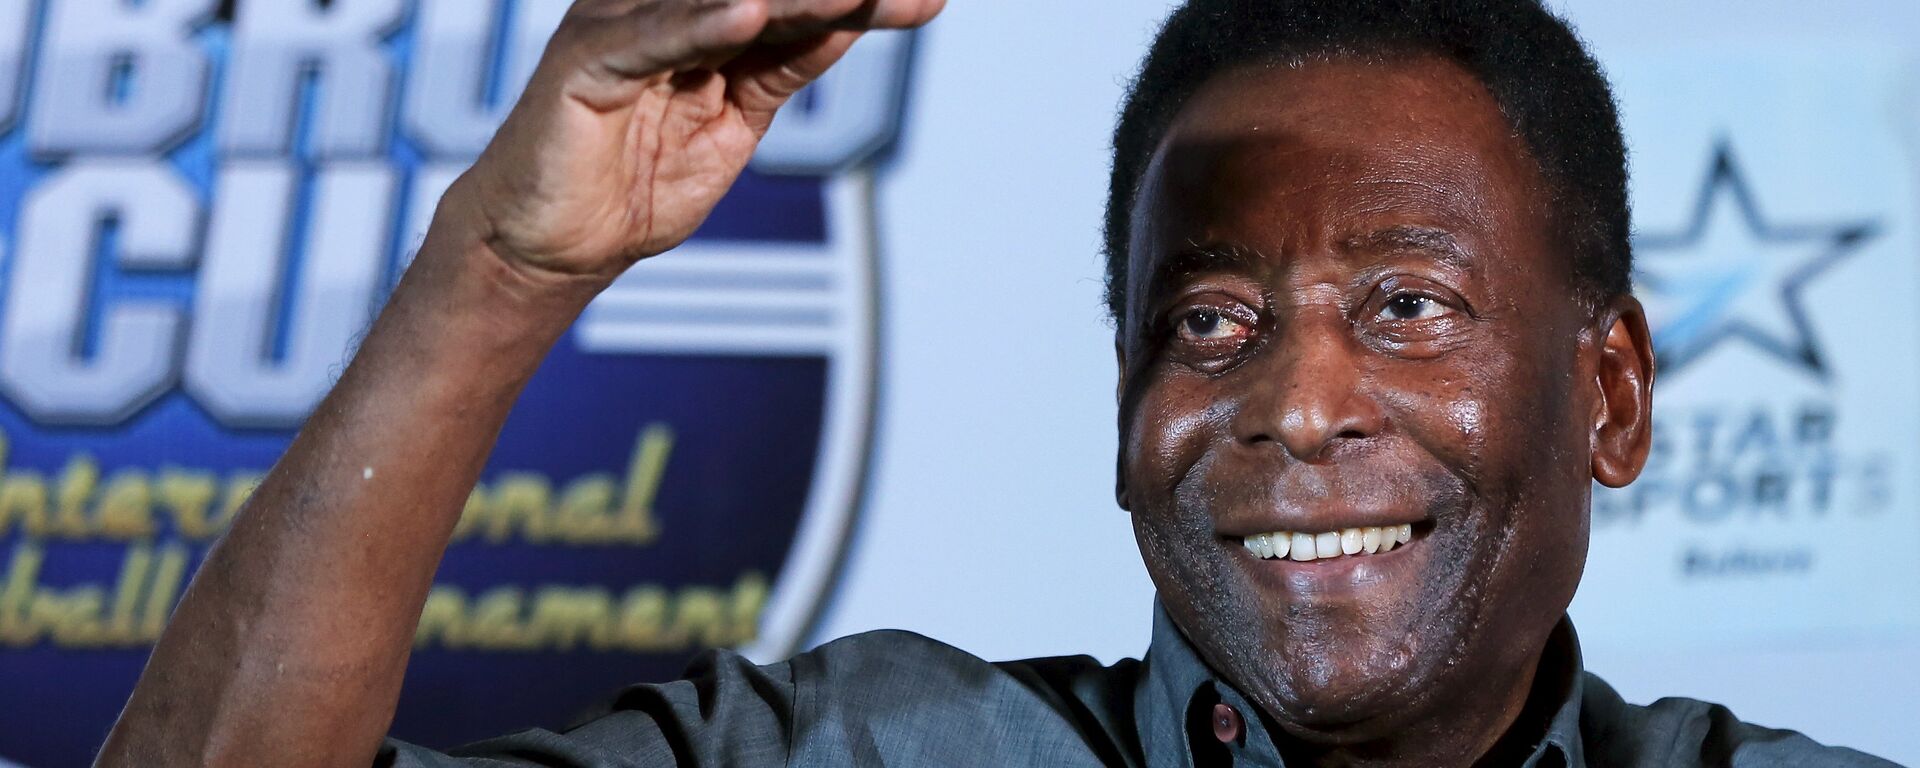 Legendary Brazilian soccer player Pele gestures during a news conference in Gurgaon on the outskirts of New Delhi, India, October 15, 2015 - اسپوتنیک افغانستان  , 1920, 14.03.2021